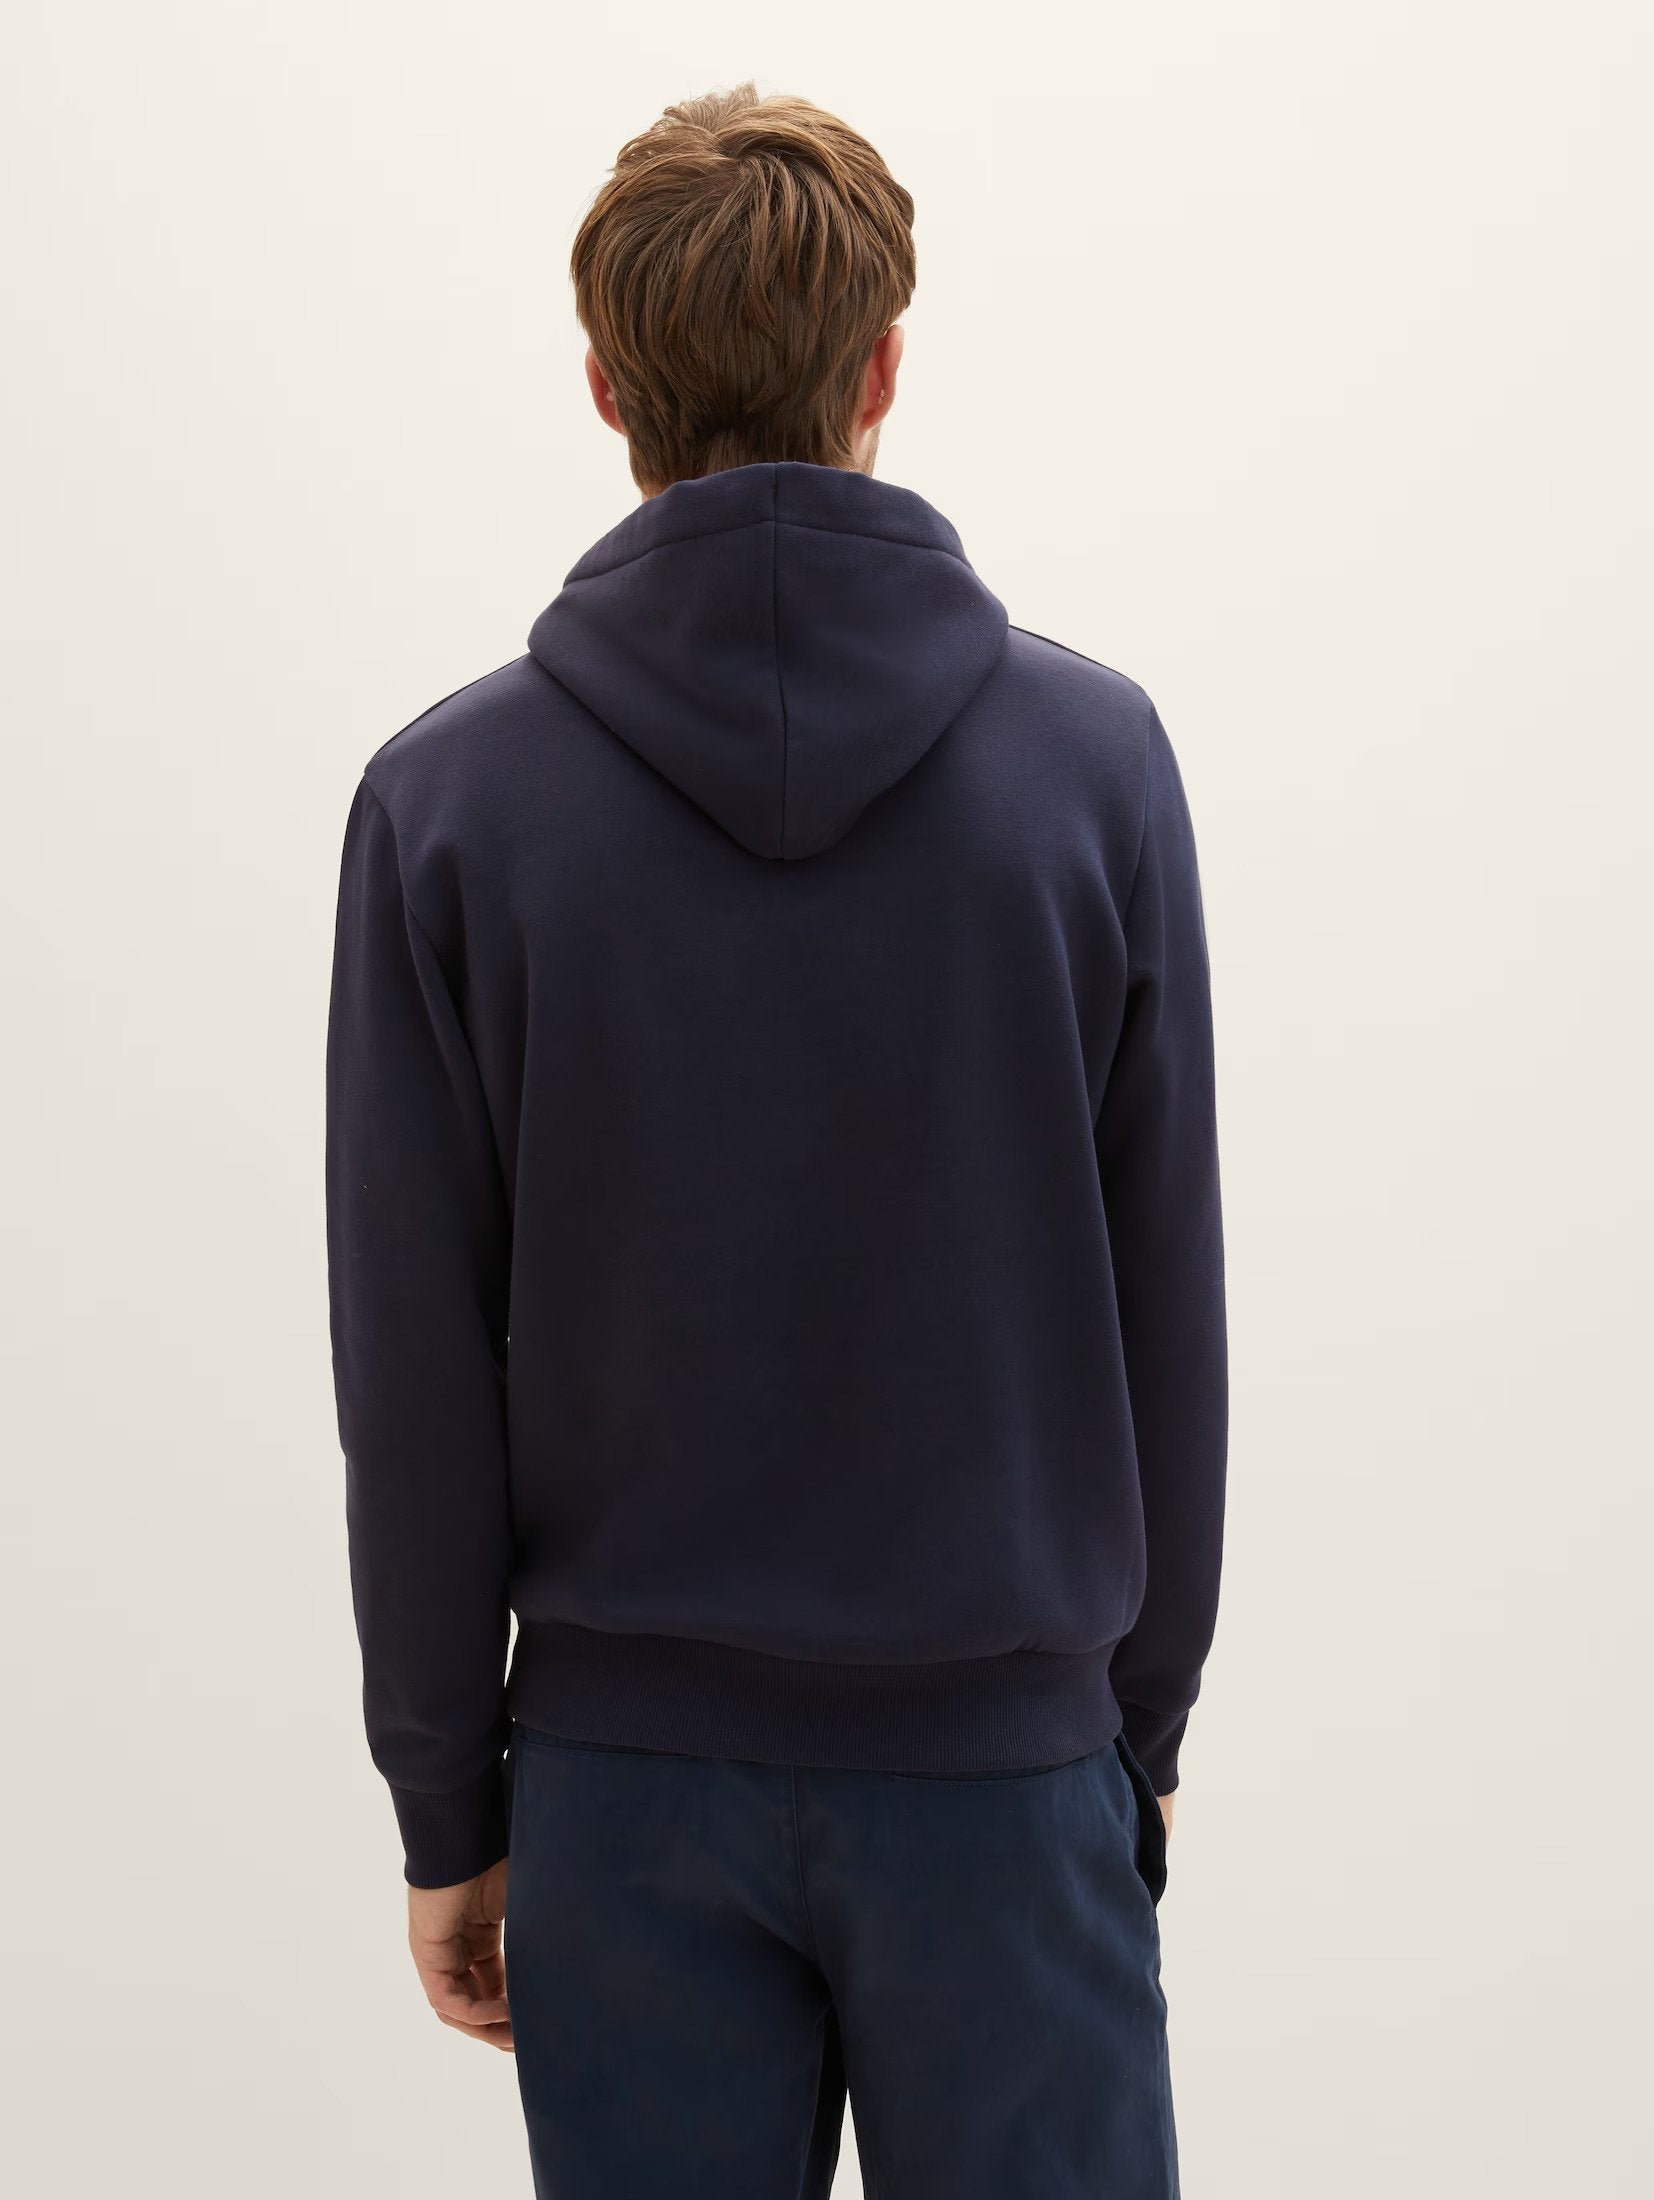 Tom Tailor "Authentic Wear" Designed Navy Hoodie